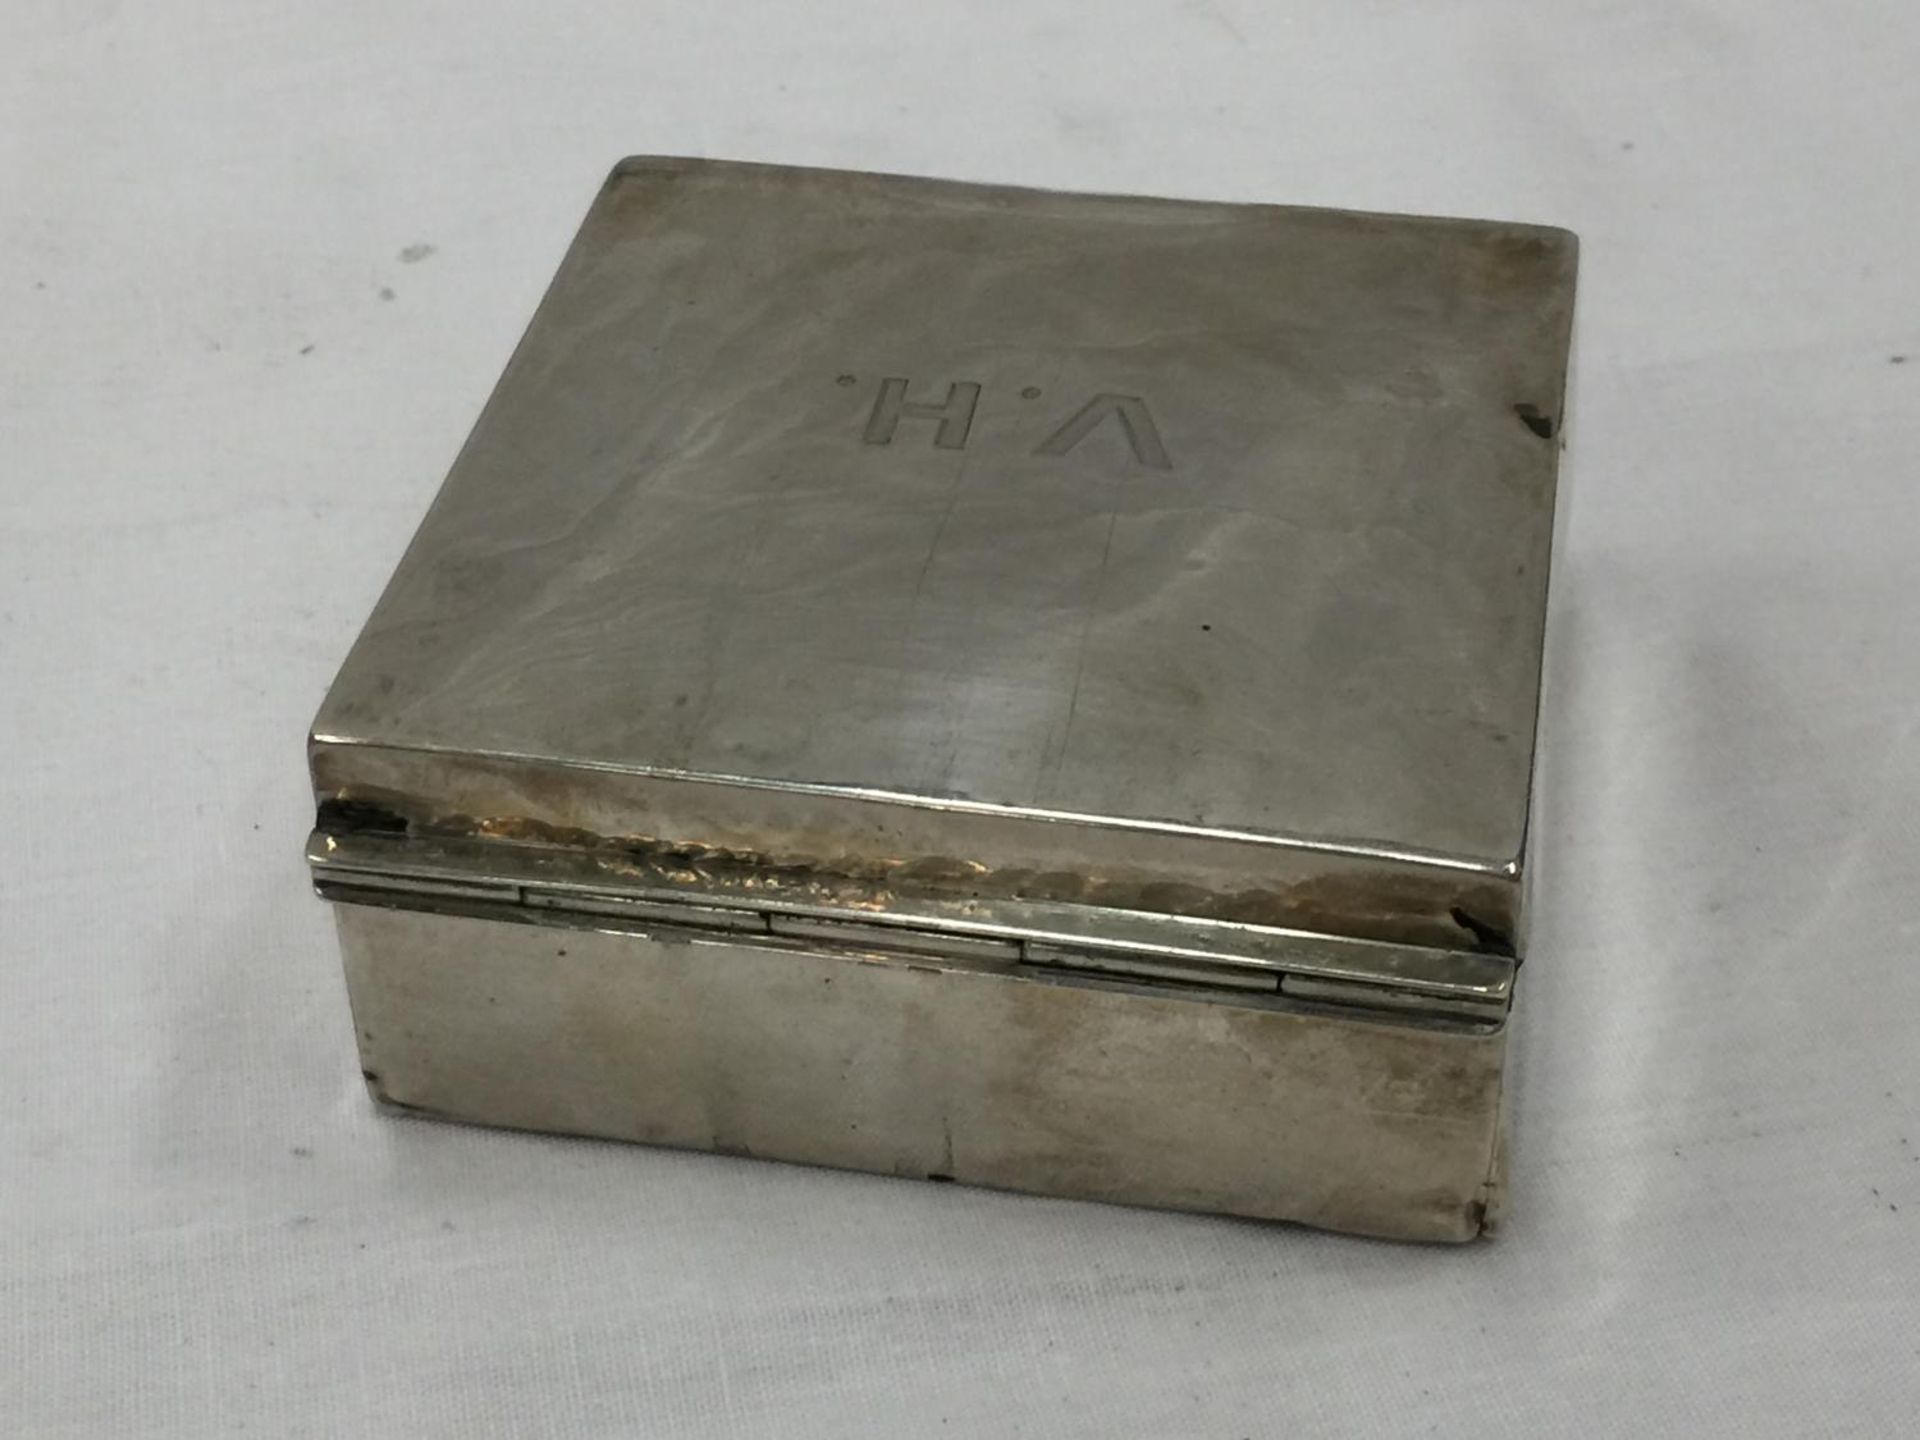 A HALLMARKED (INDISTINCT) SILVER TRINKET BOX WITH WOODEN LINING. WEIGHT: 234 GRAMS - Image 6 of 8